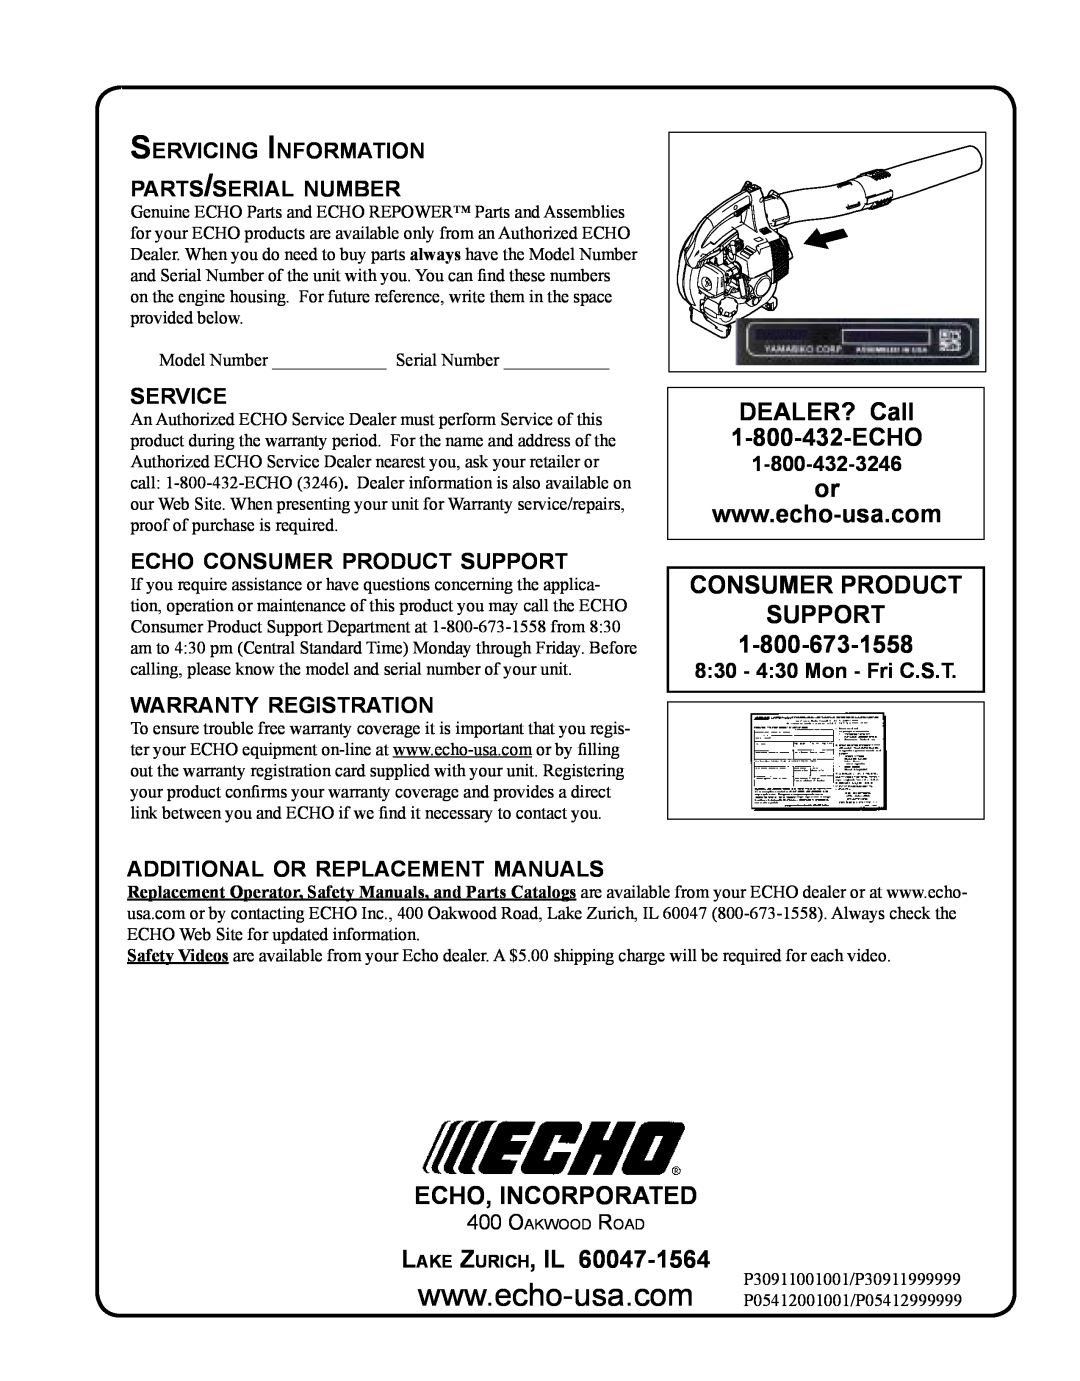 Echo PB-250 DEALER? Call, Consumer Product Support, Echo, Incorporated, Lake Zurich, IL, service, warranty registration 